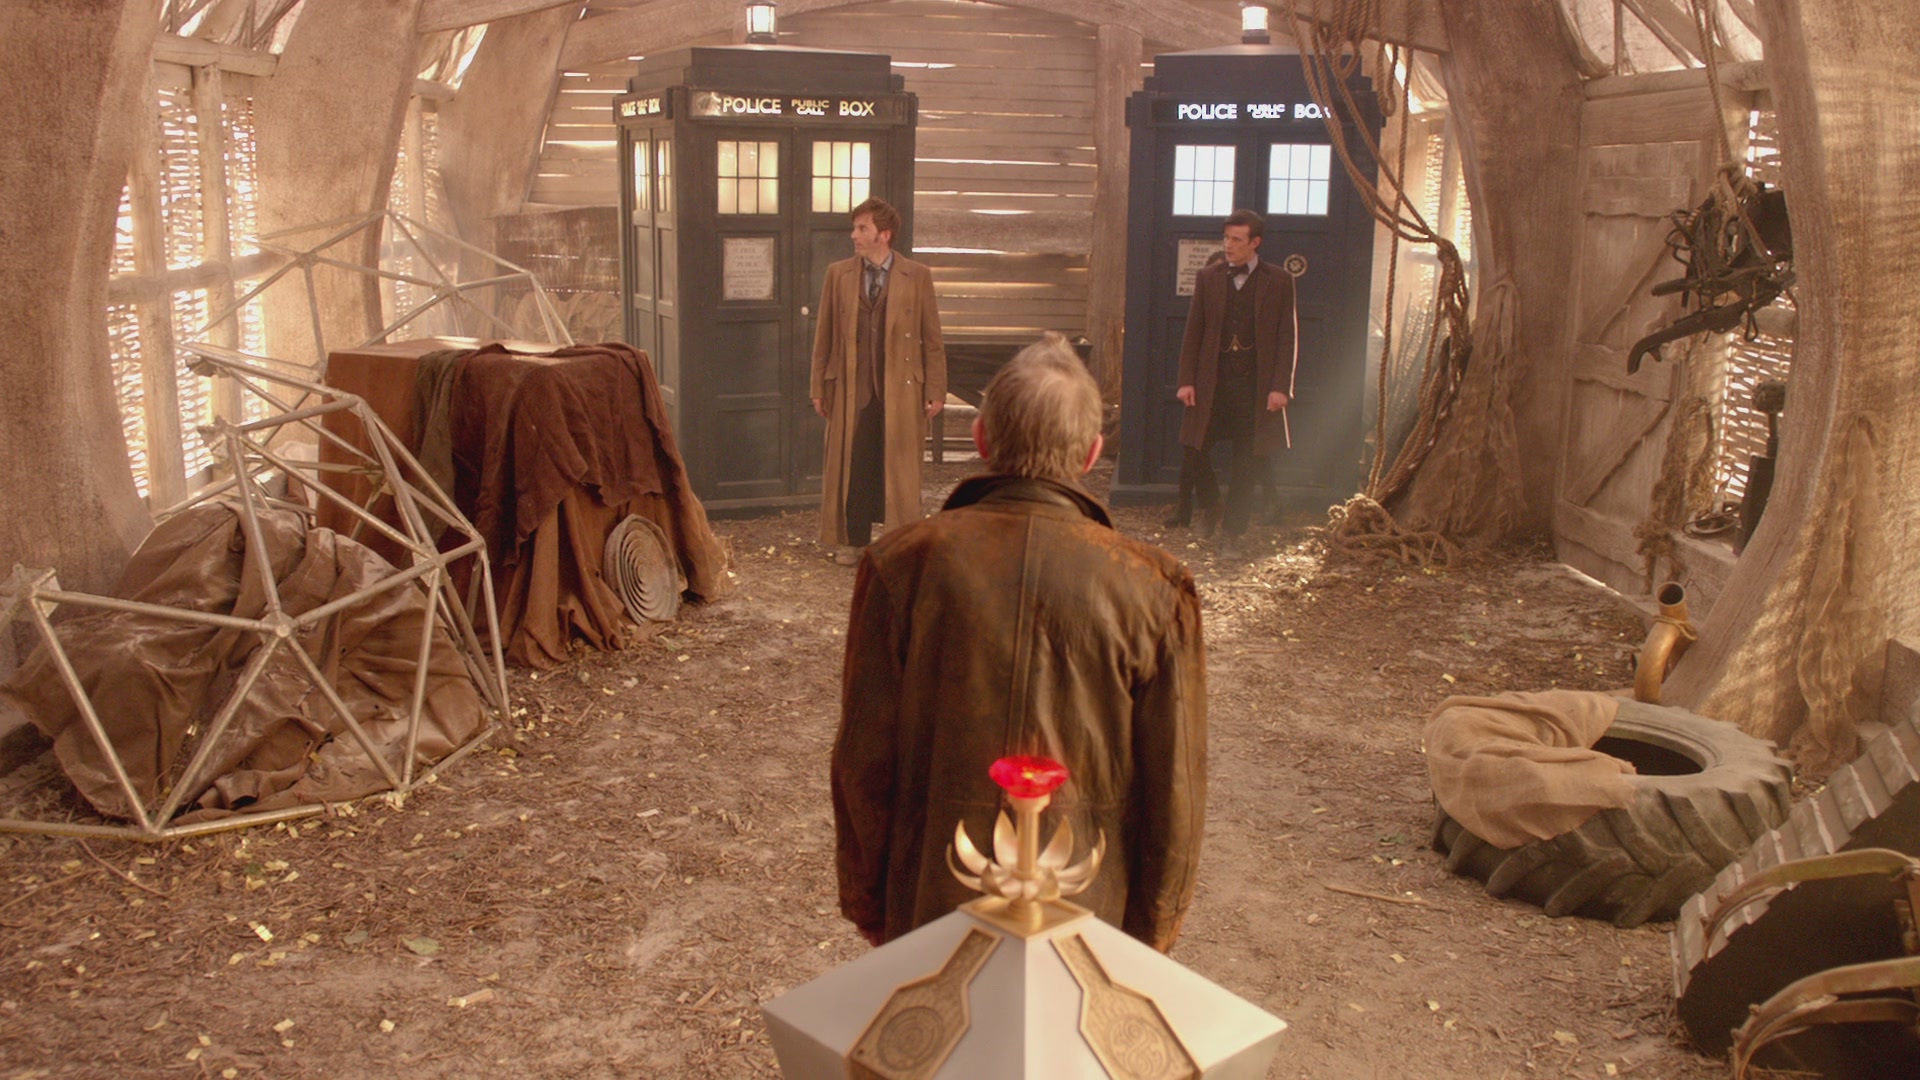 DayOfTheDoctor-Caps-1064.jpg